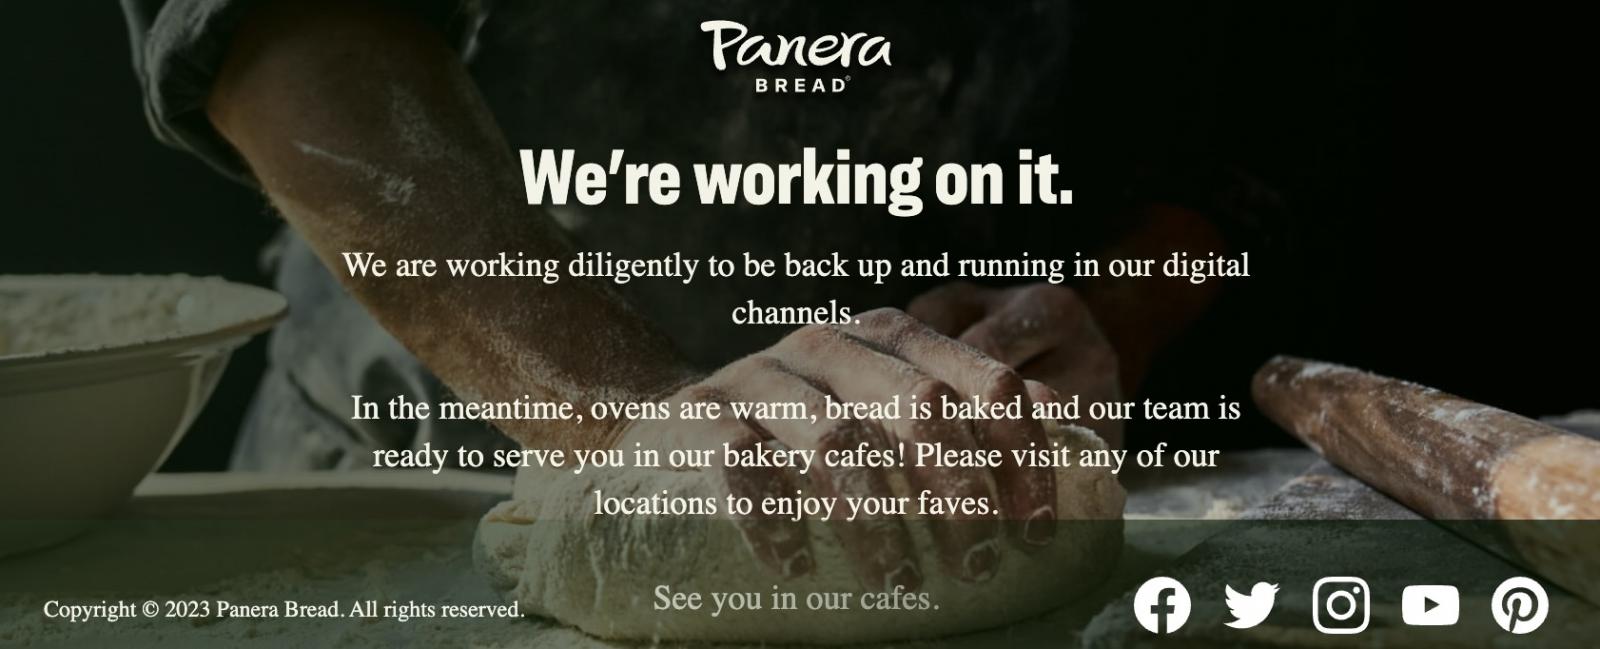 Panera Bread website outage